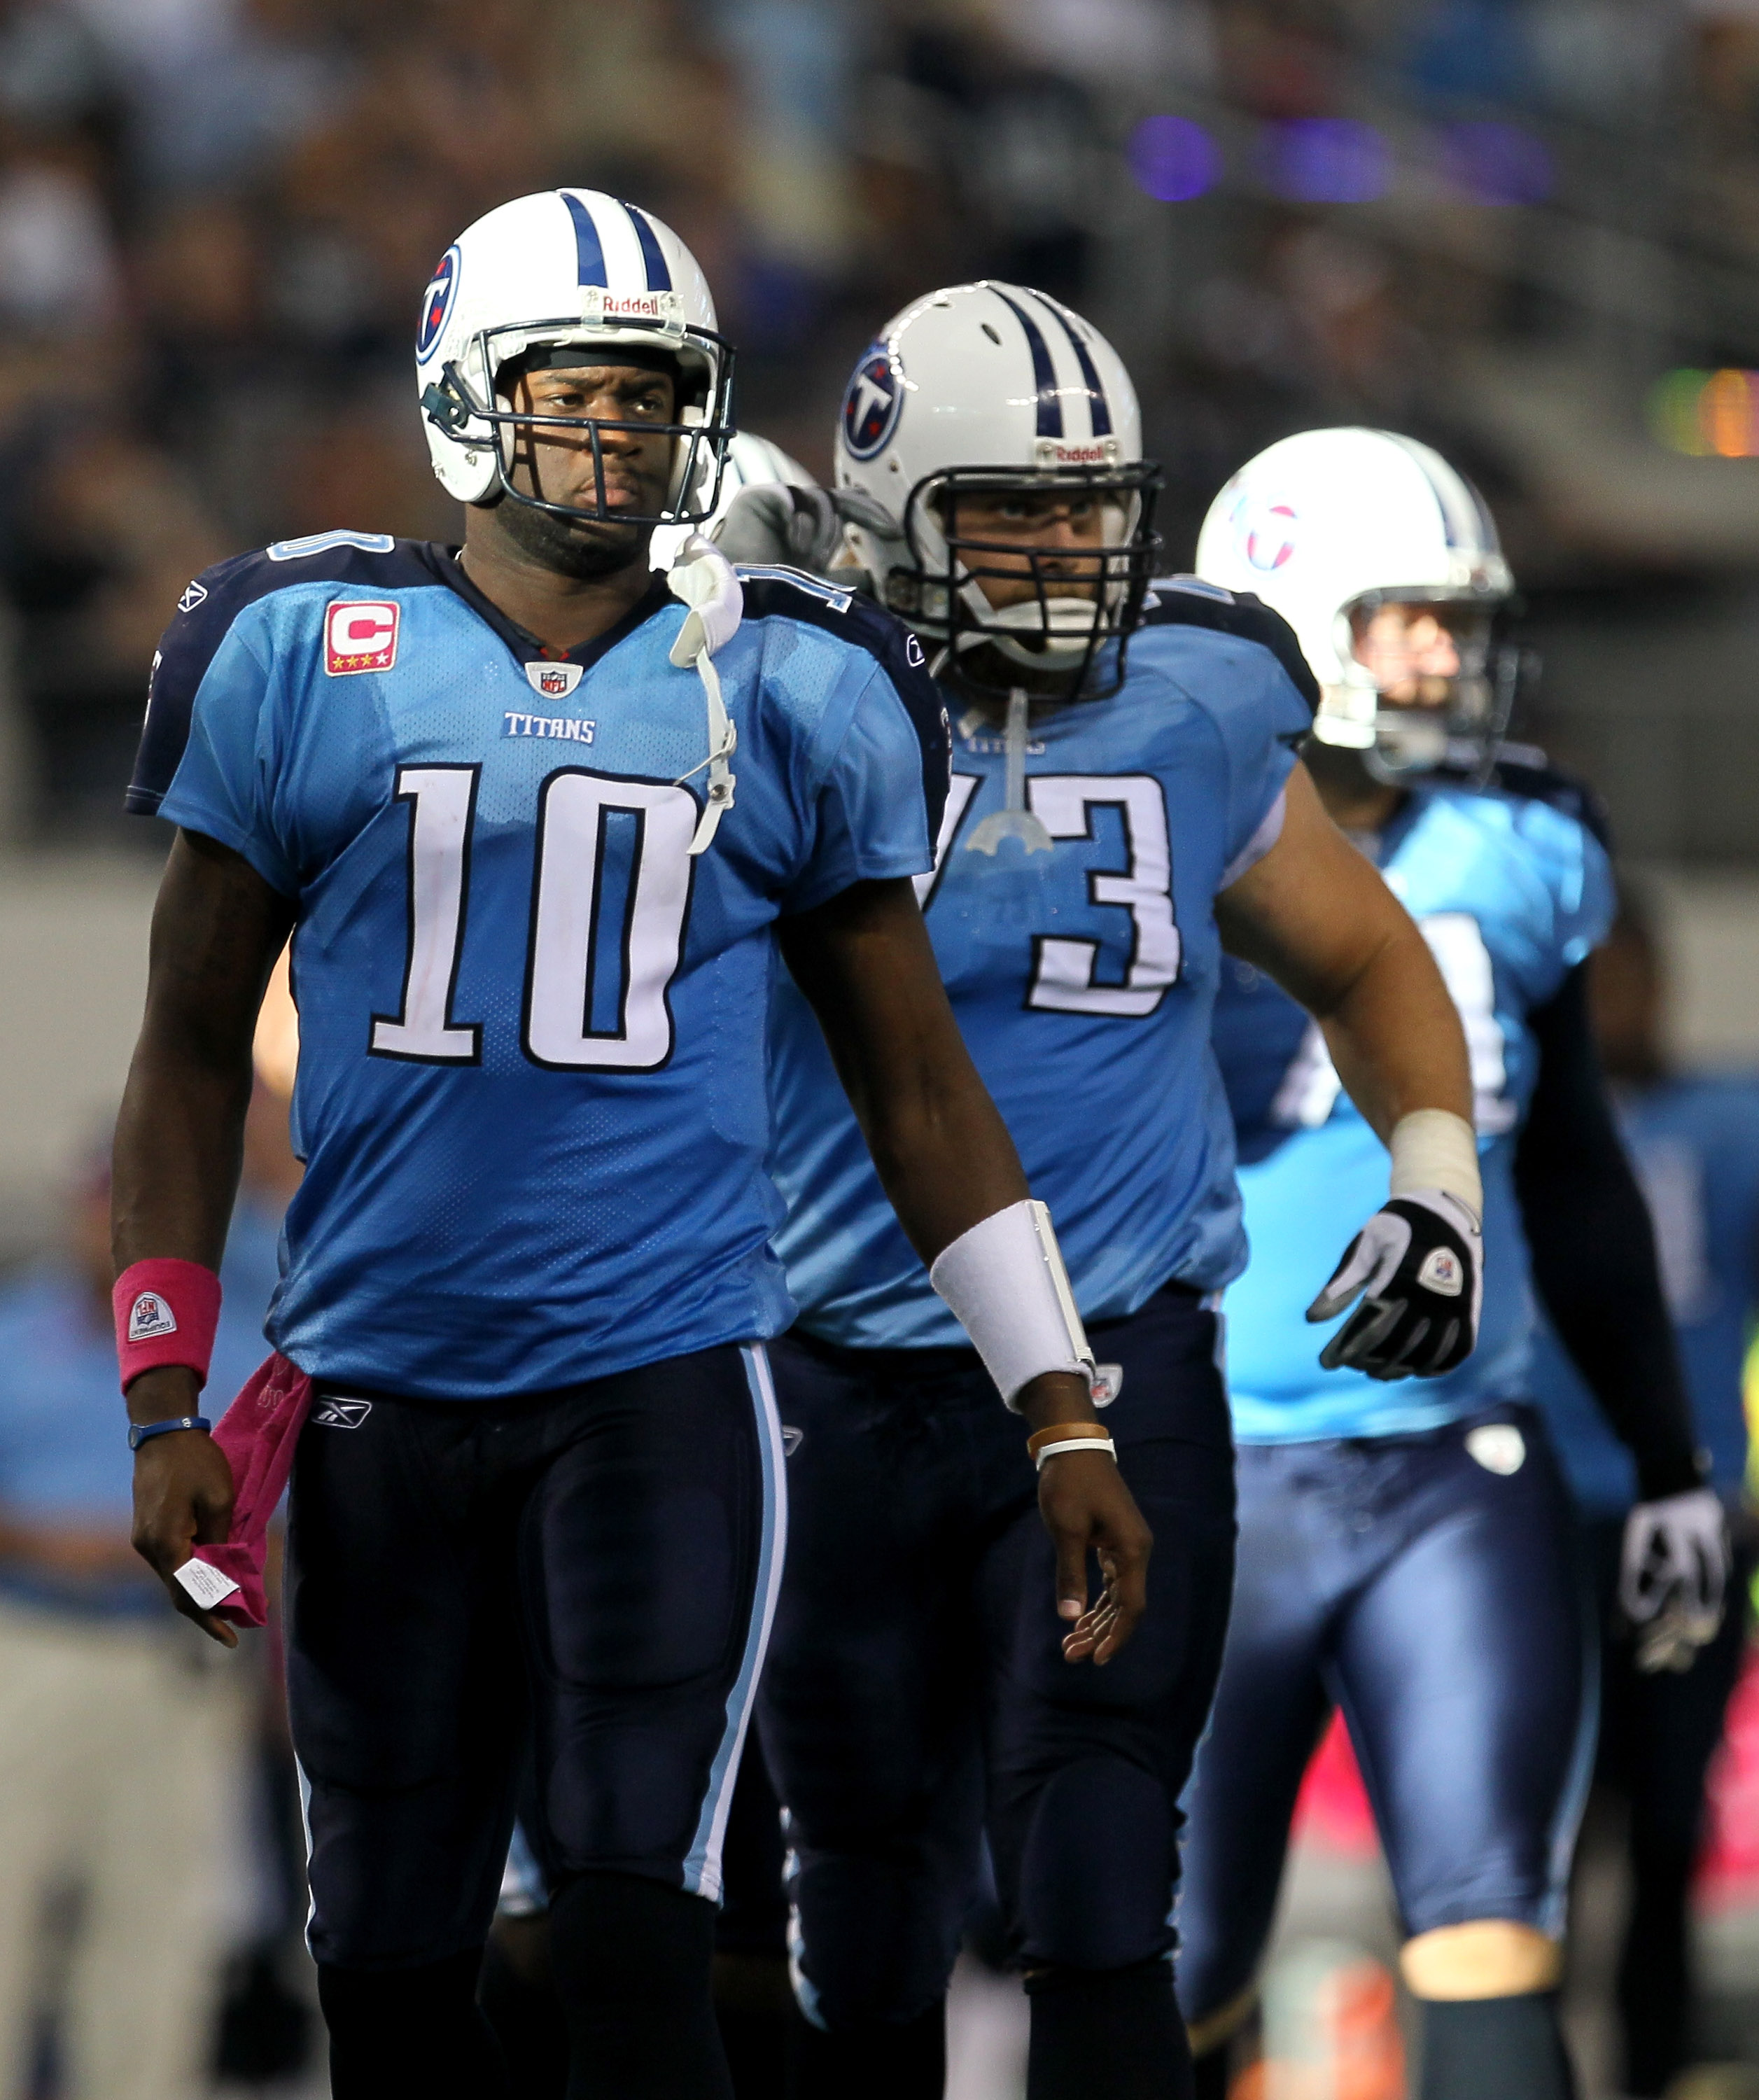 ARLINGTON, TX - OCTOBER 10:  Quarterback Vince Young #10 of the Tennessee Titans leads the offense onto the field after a turnover in the game against the Dallas Cowboys at Cowboys Stadium on October 10, 2010 in Arlington, Texas.   The Titans won 34-27.